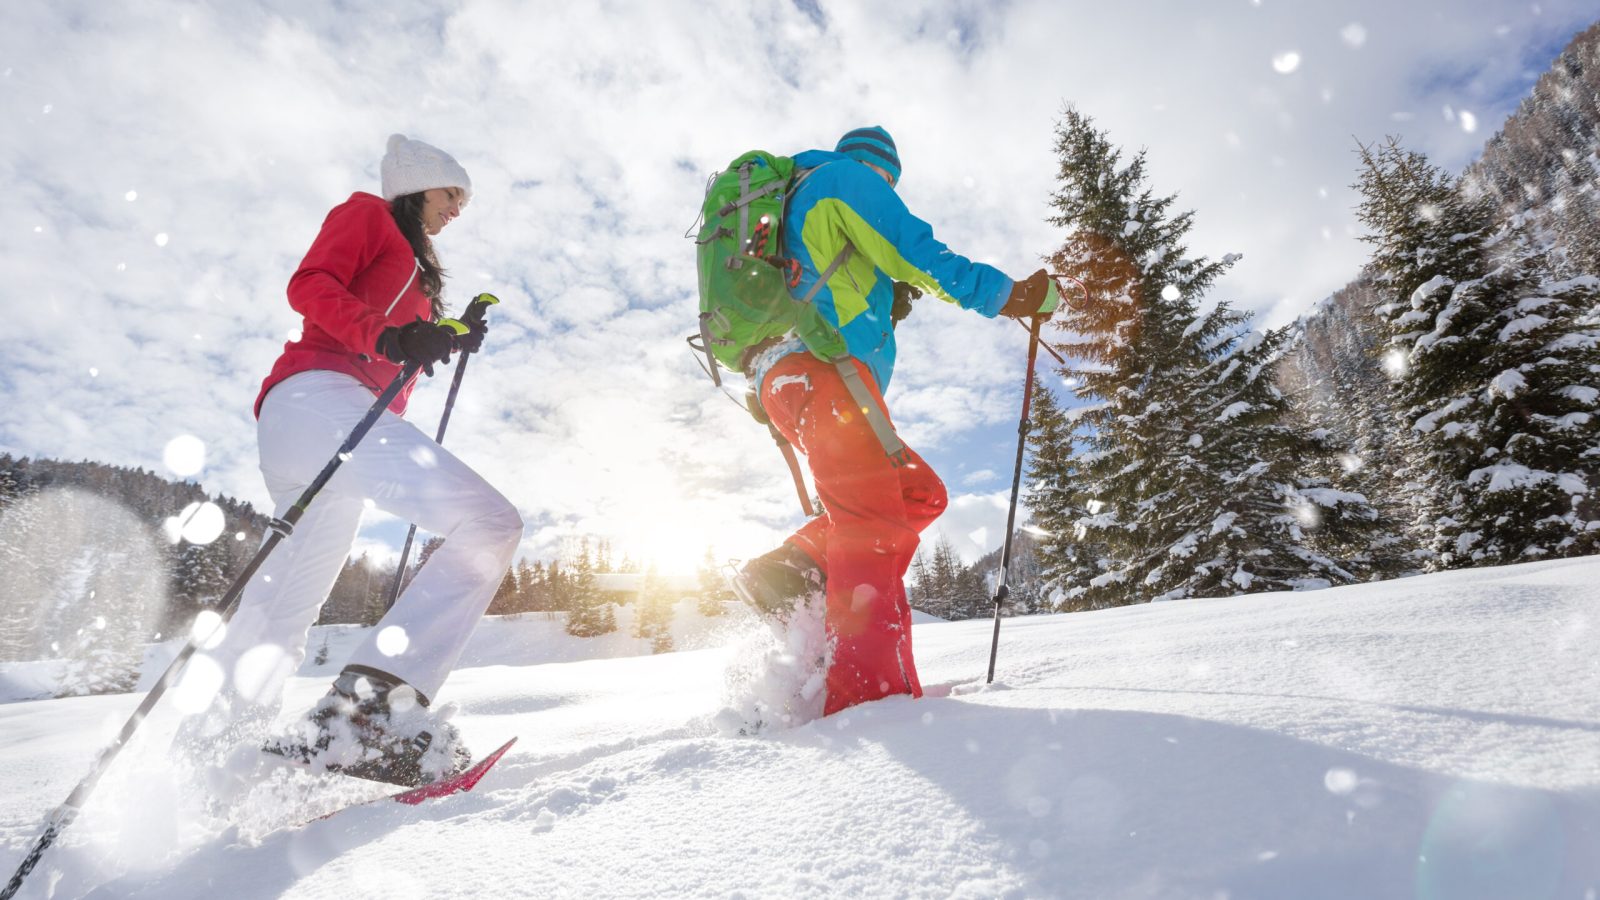 An image of a couple embarking on a snowshoeing adventure in the picturesque winter wonderland.